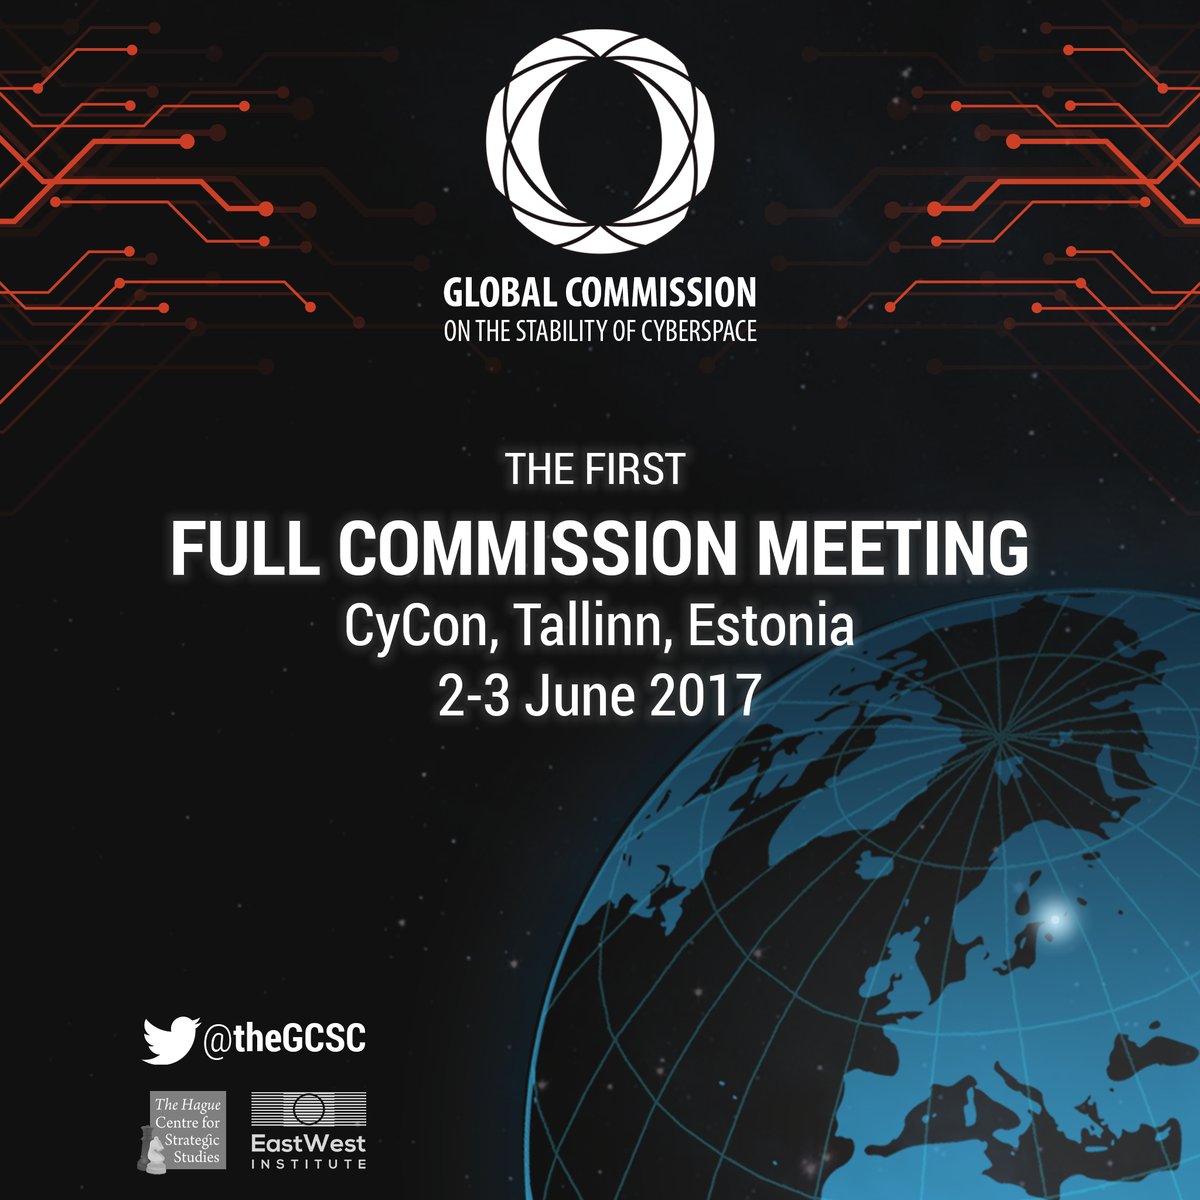 Global Commission on the Stability of Cyberspace to Hold First Meeting